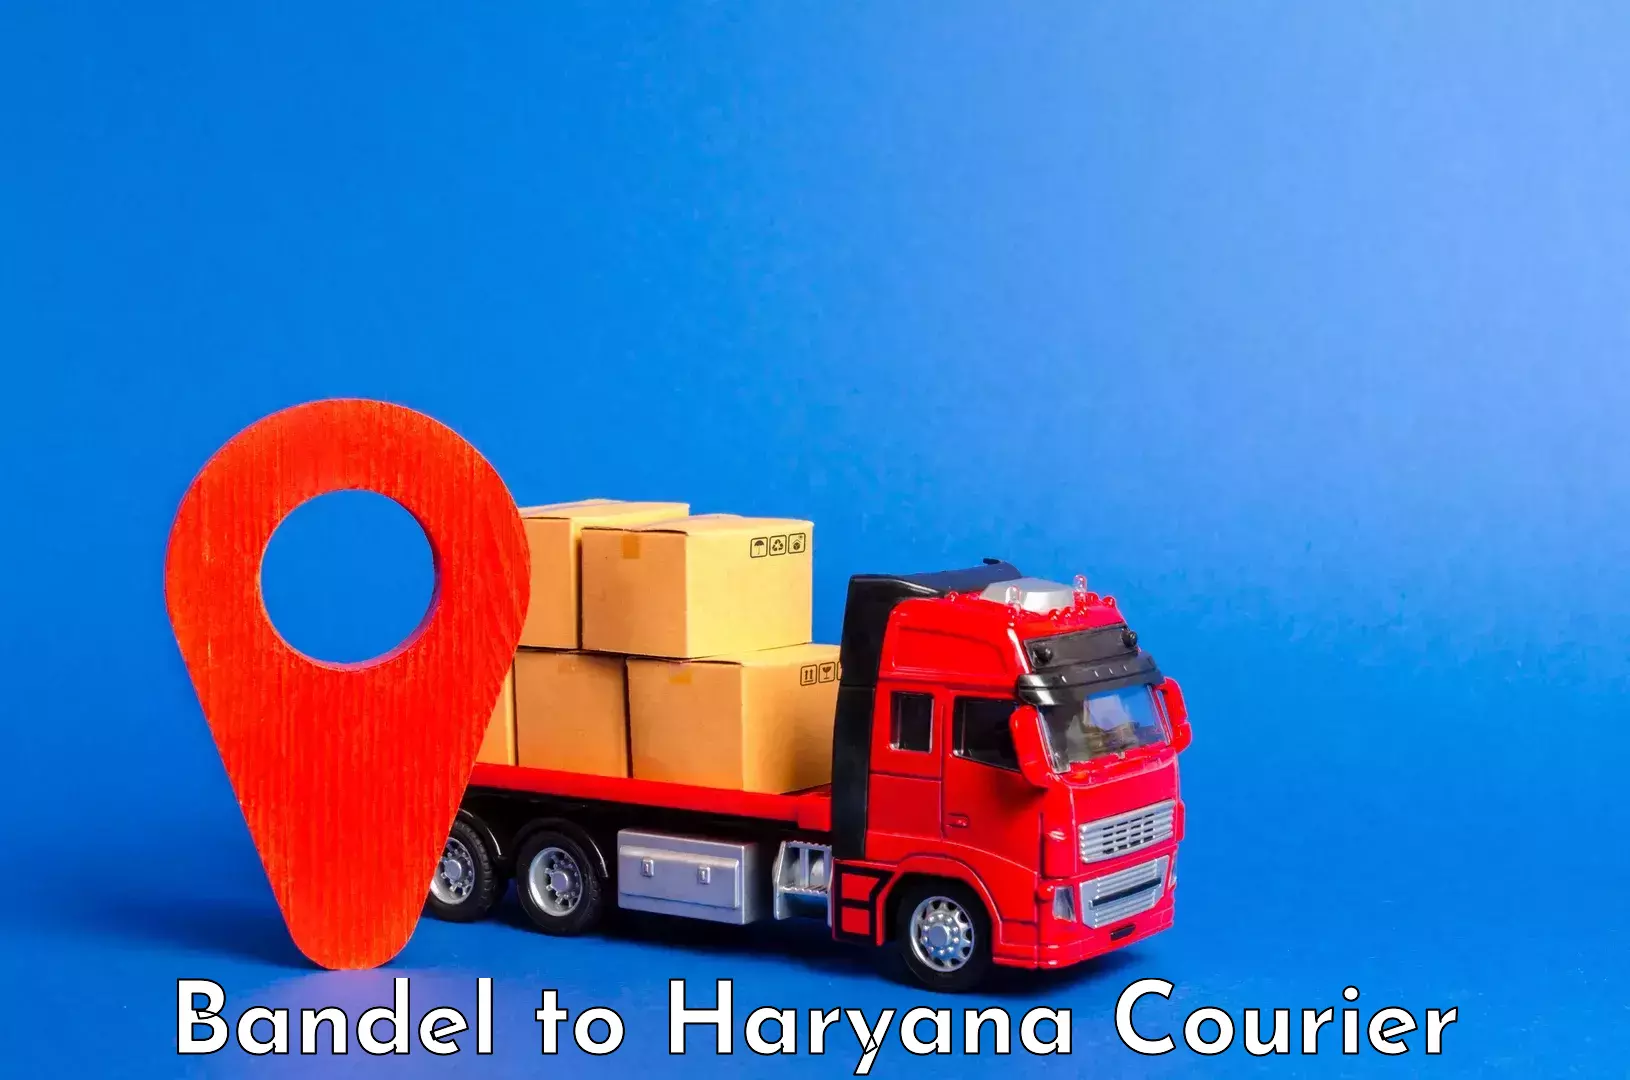 Instant baggage transport quote Bandel to Chaudhary Charan Singh Haryana Agricultural University Hisar